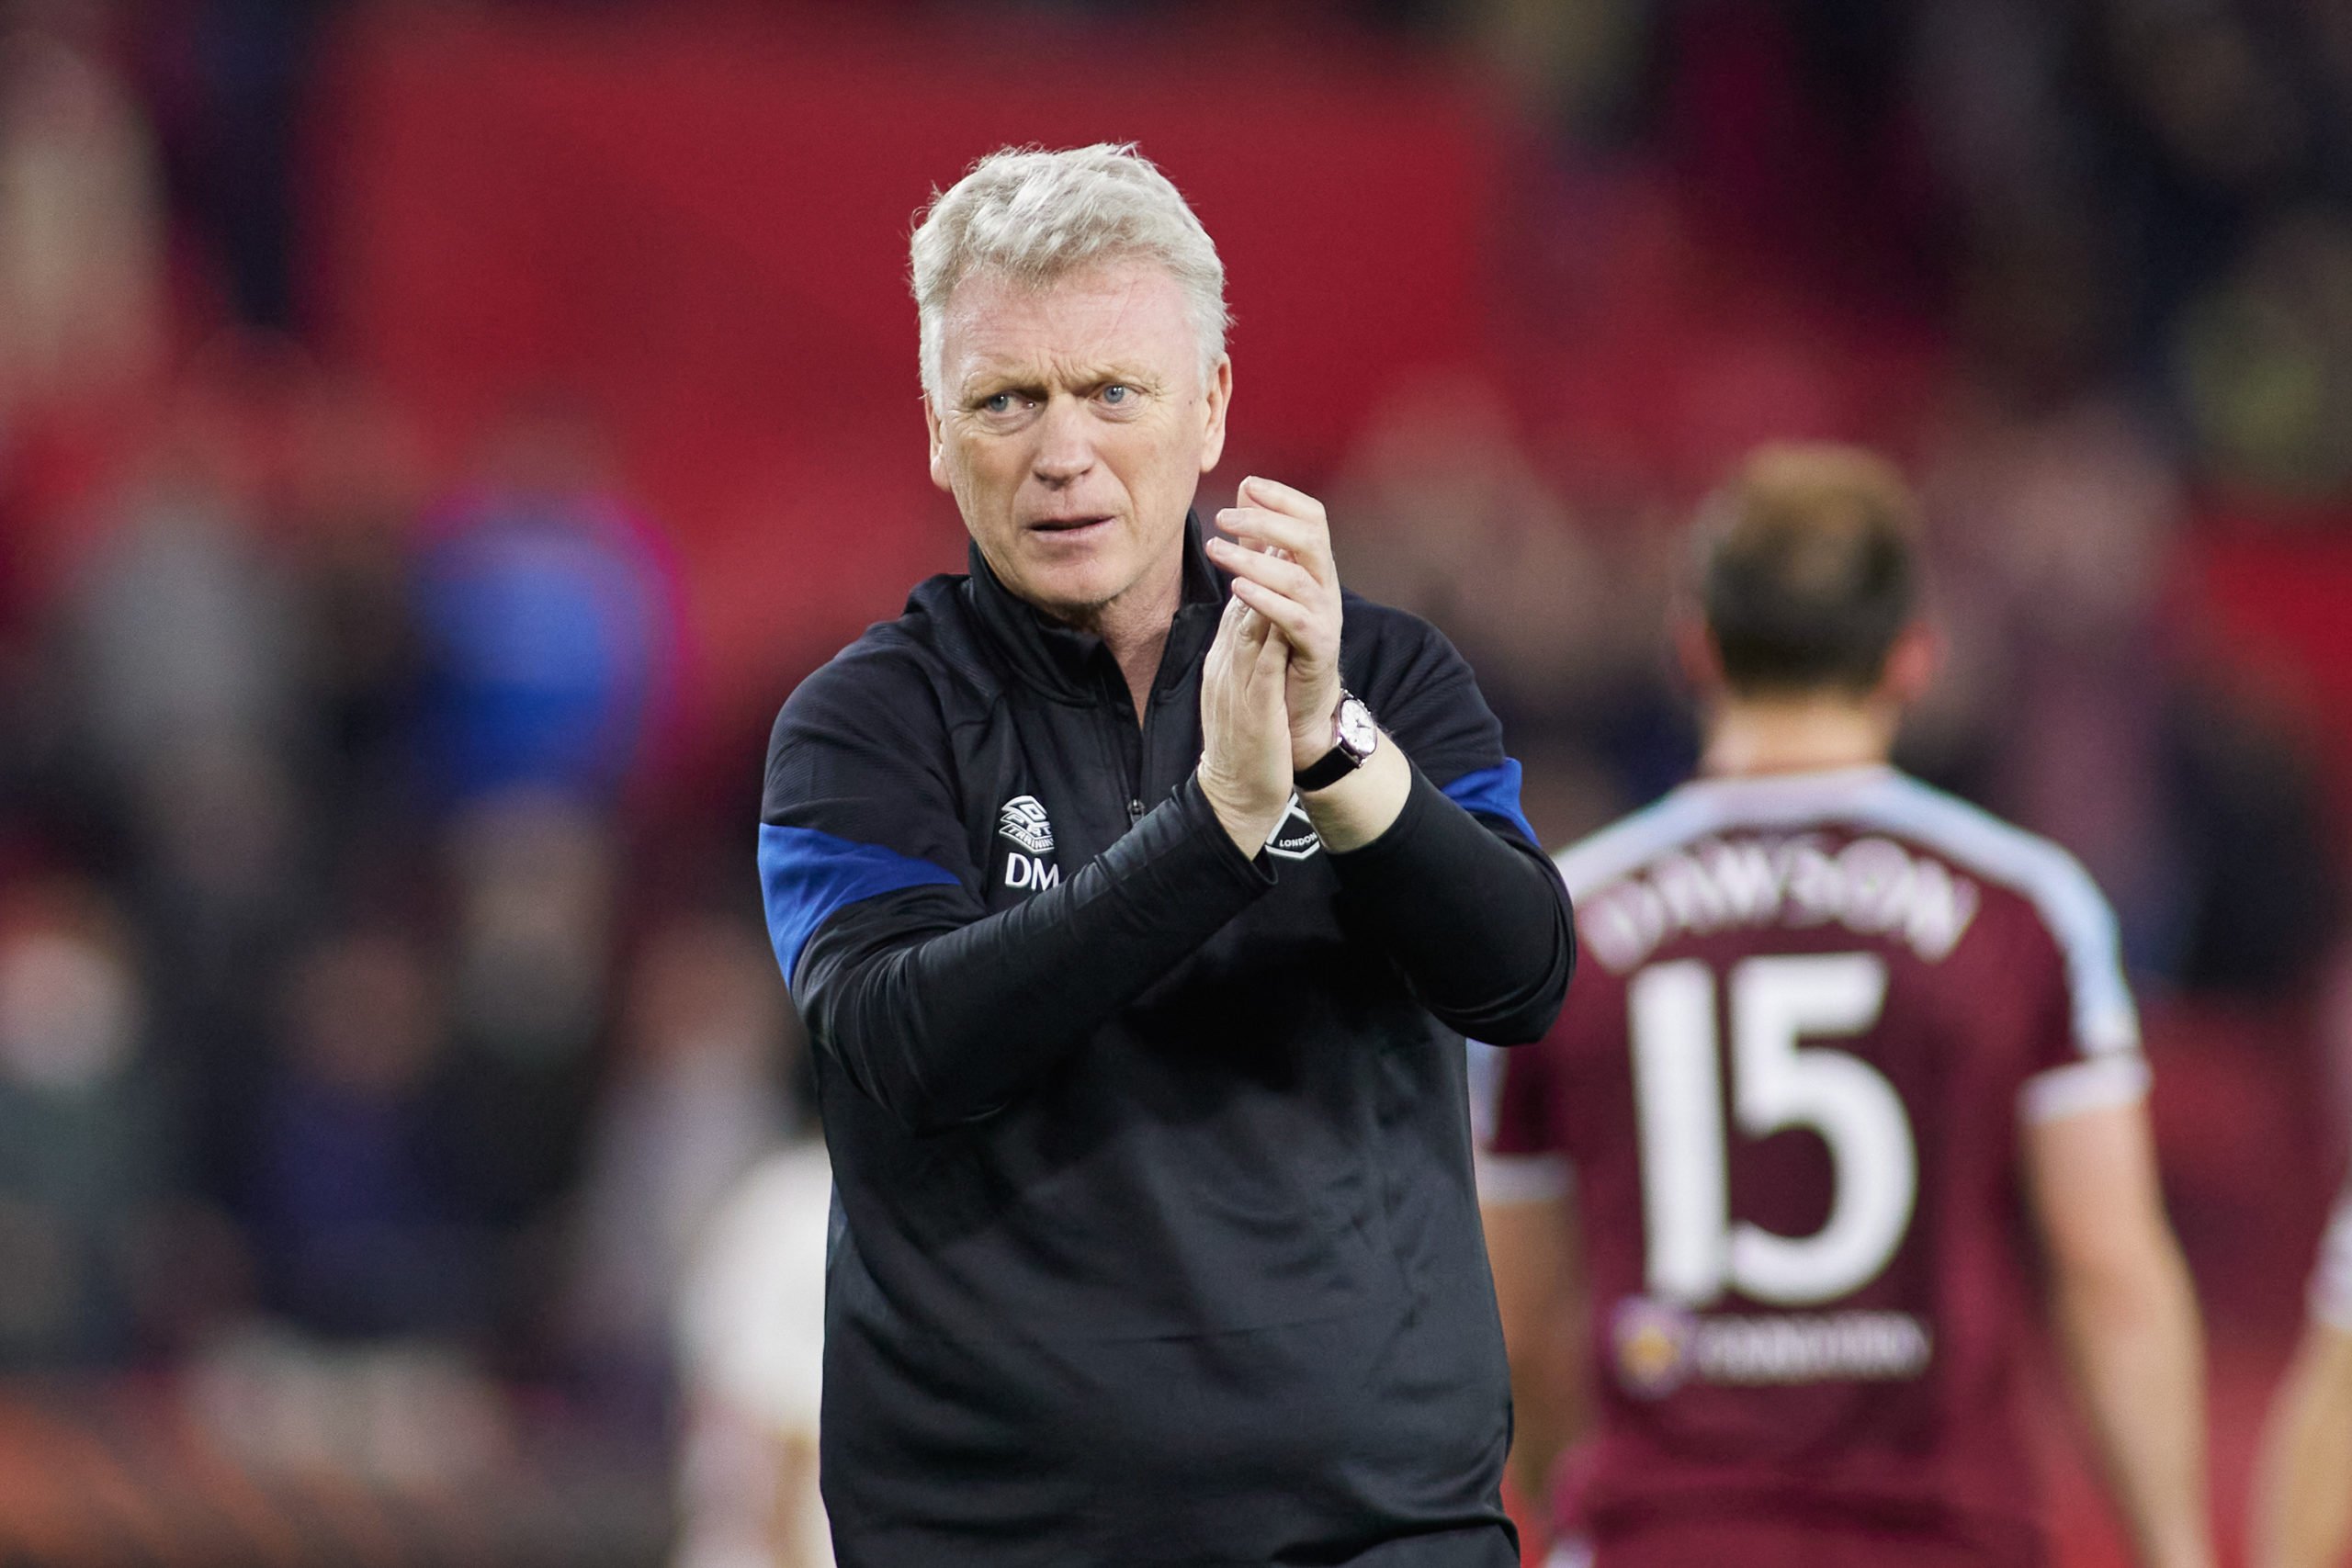 London-based star David Moyes wanted from Man City could now join West Ham claims report